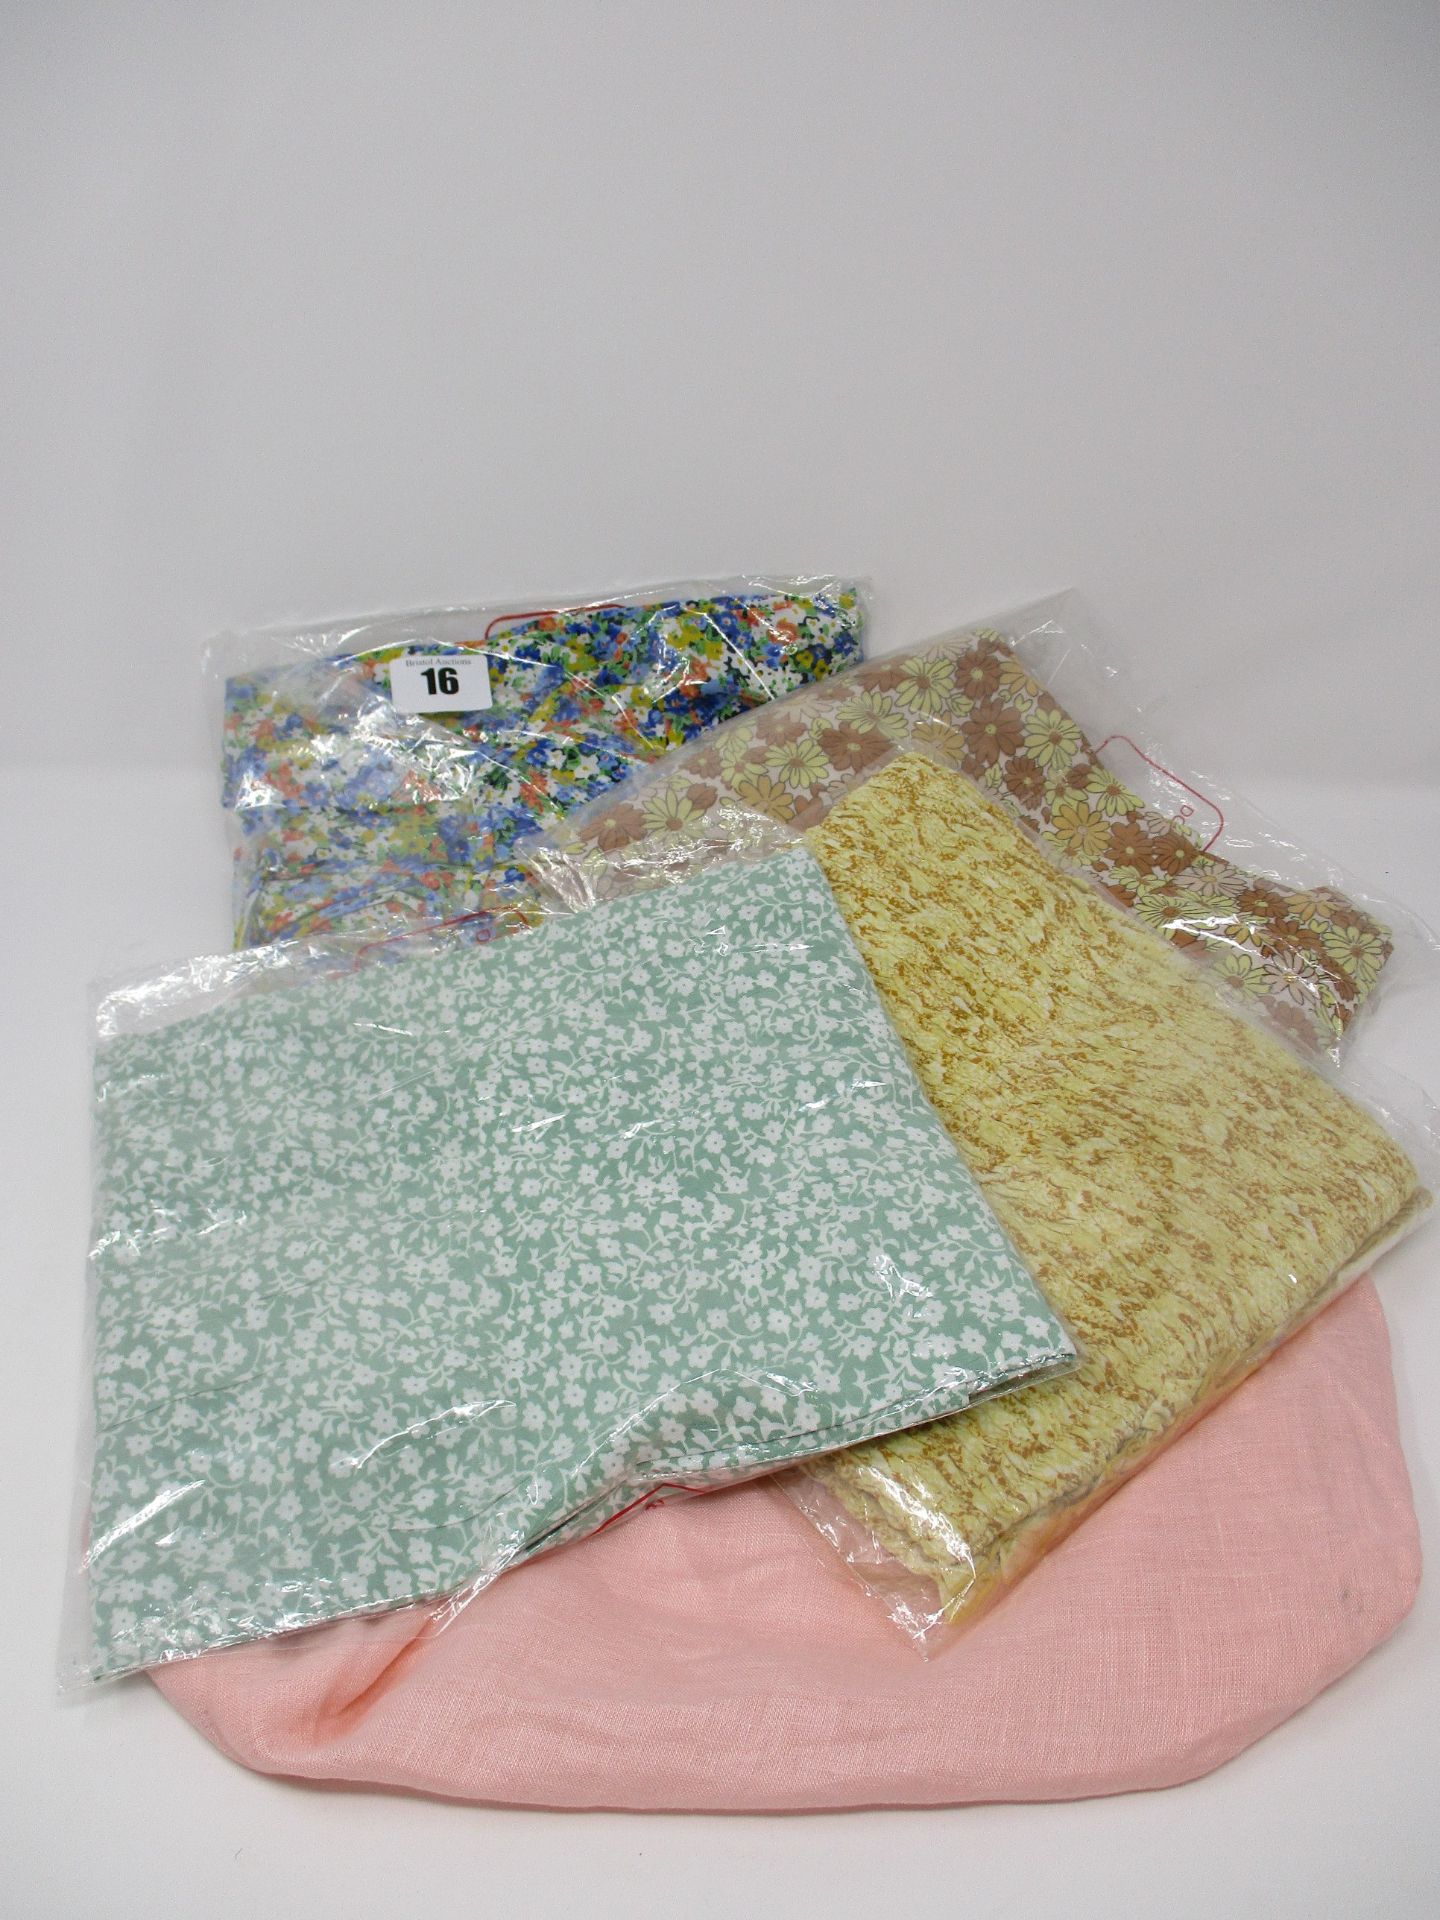 One as new Faithfull the Brand Racquel Floral Skirt size S. One as new Faithfull the Brand Petra